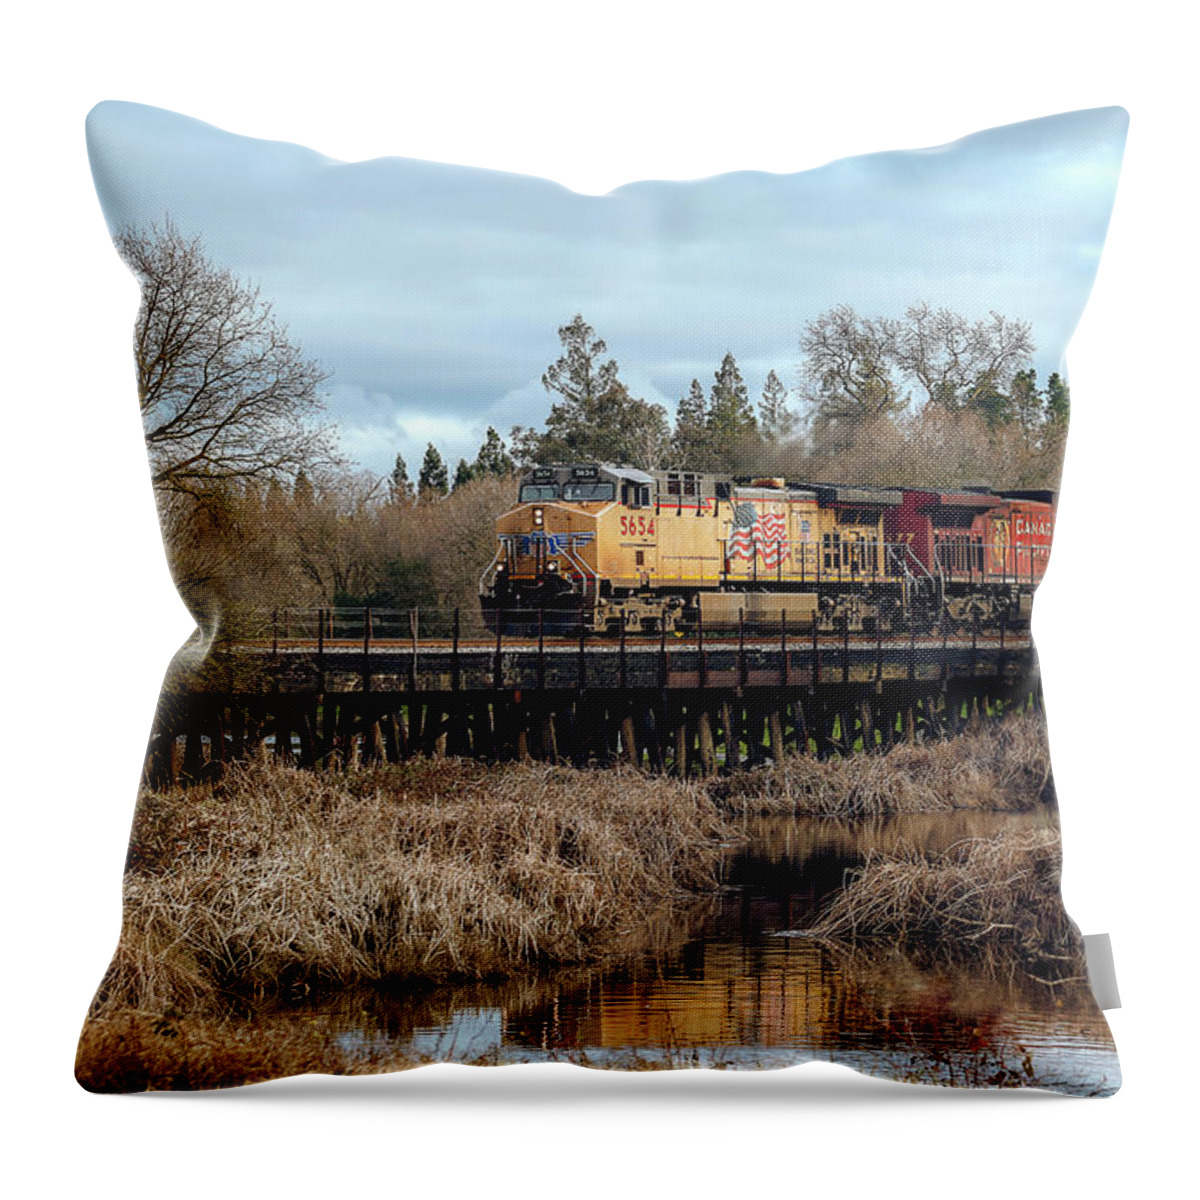 Trains Throw Pillow featuring the photograph Union Pacific Locomotive with Canadian Pacific by Gary Geddes